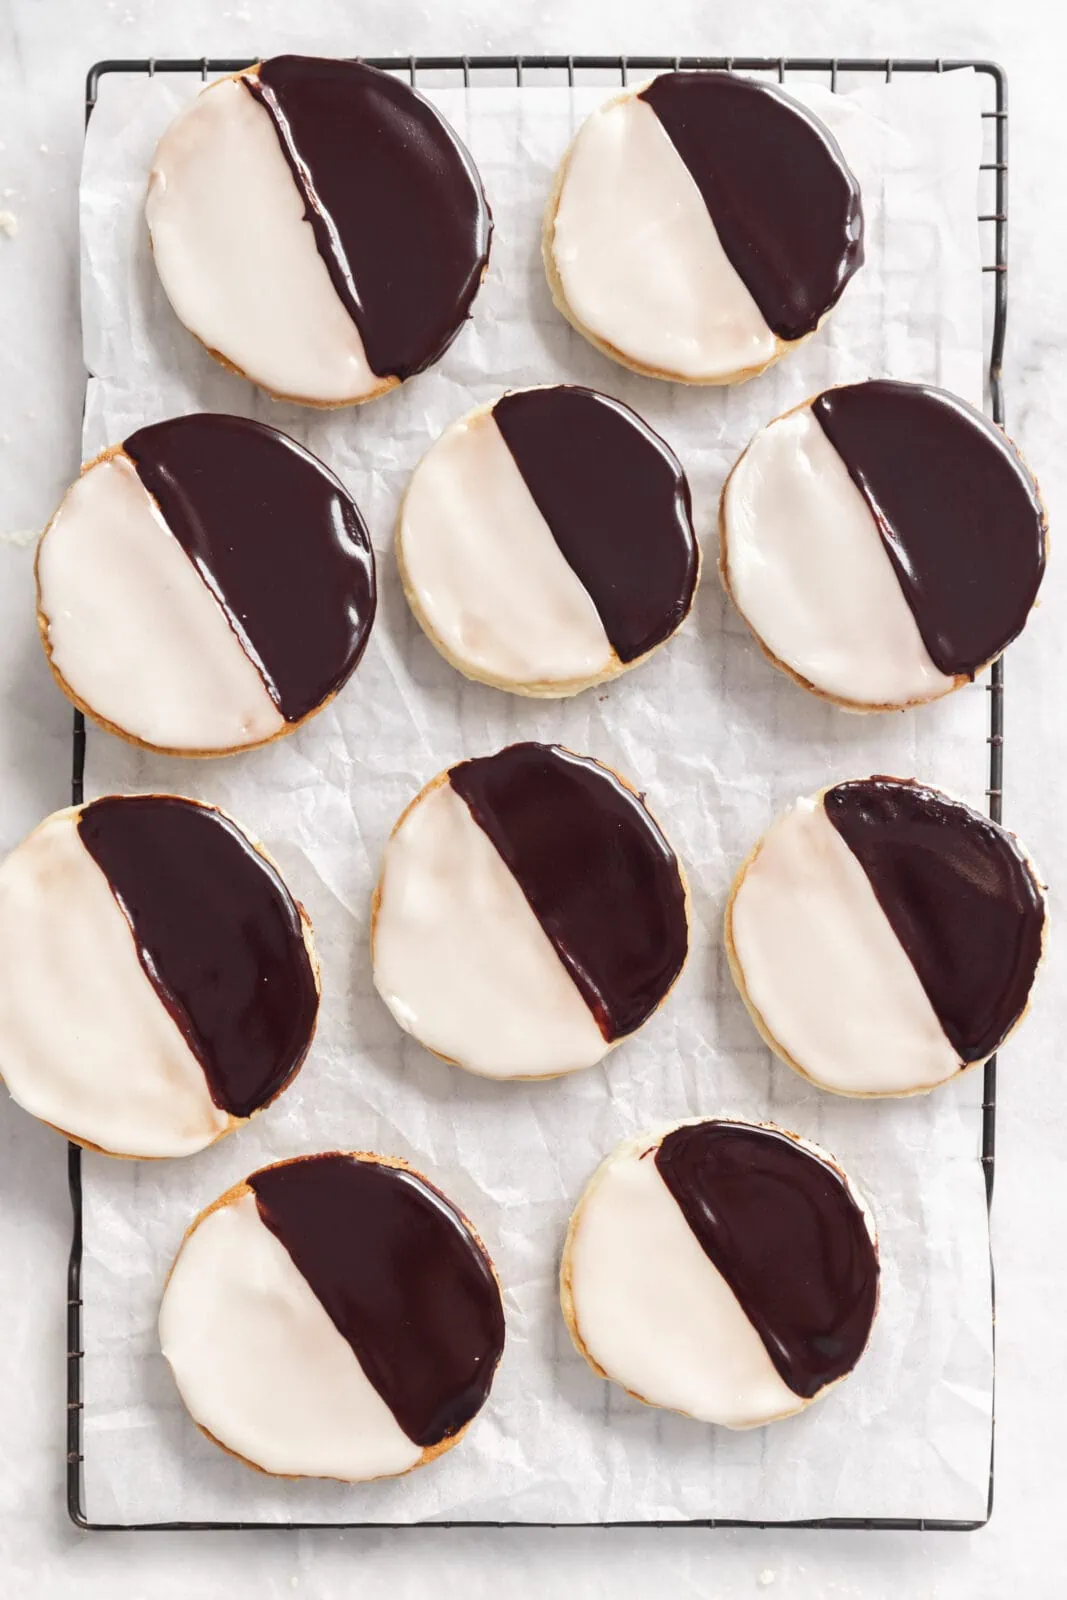 Black and white biscuits on a cooling rack